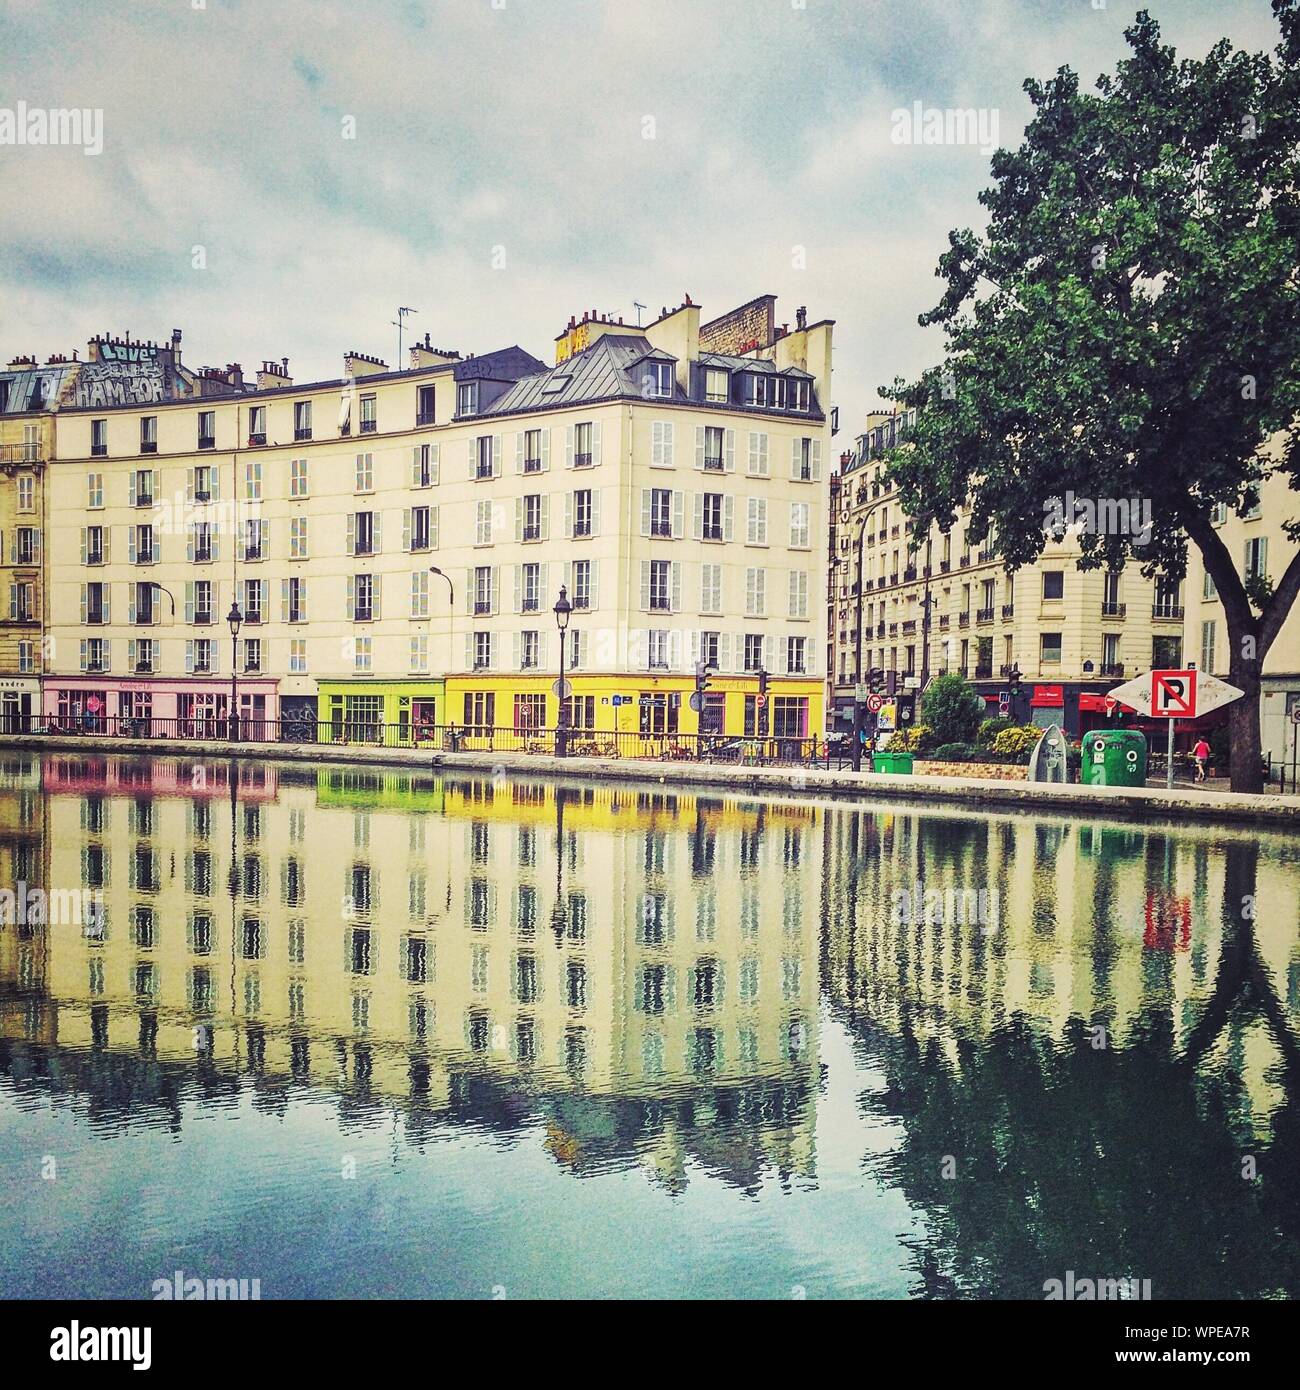 Canal Saint-martin Against Buildings In City Stock Photo